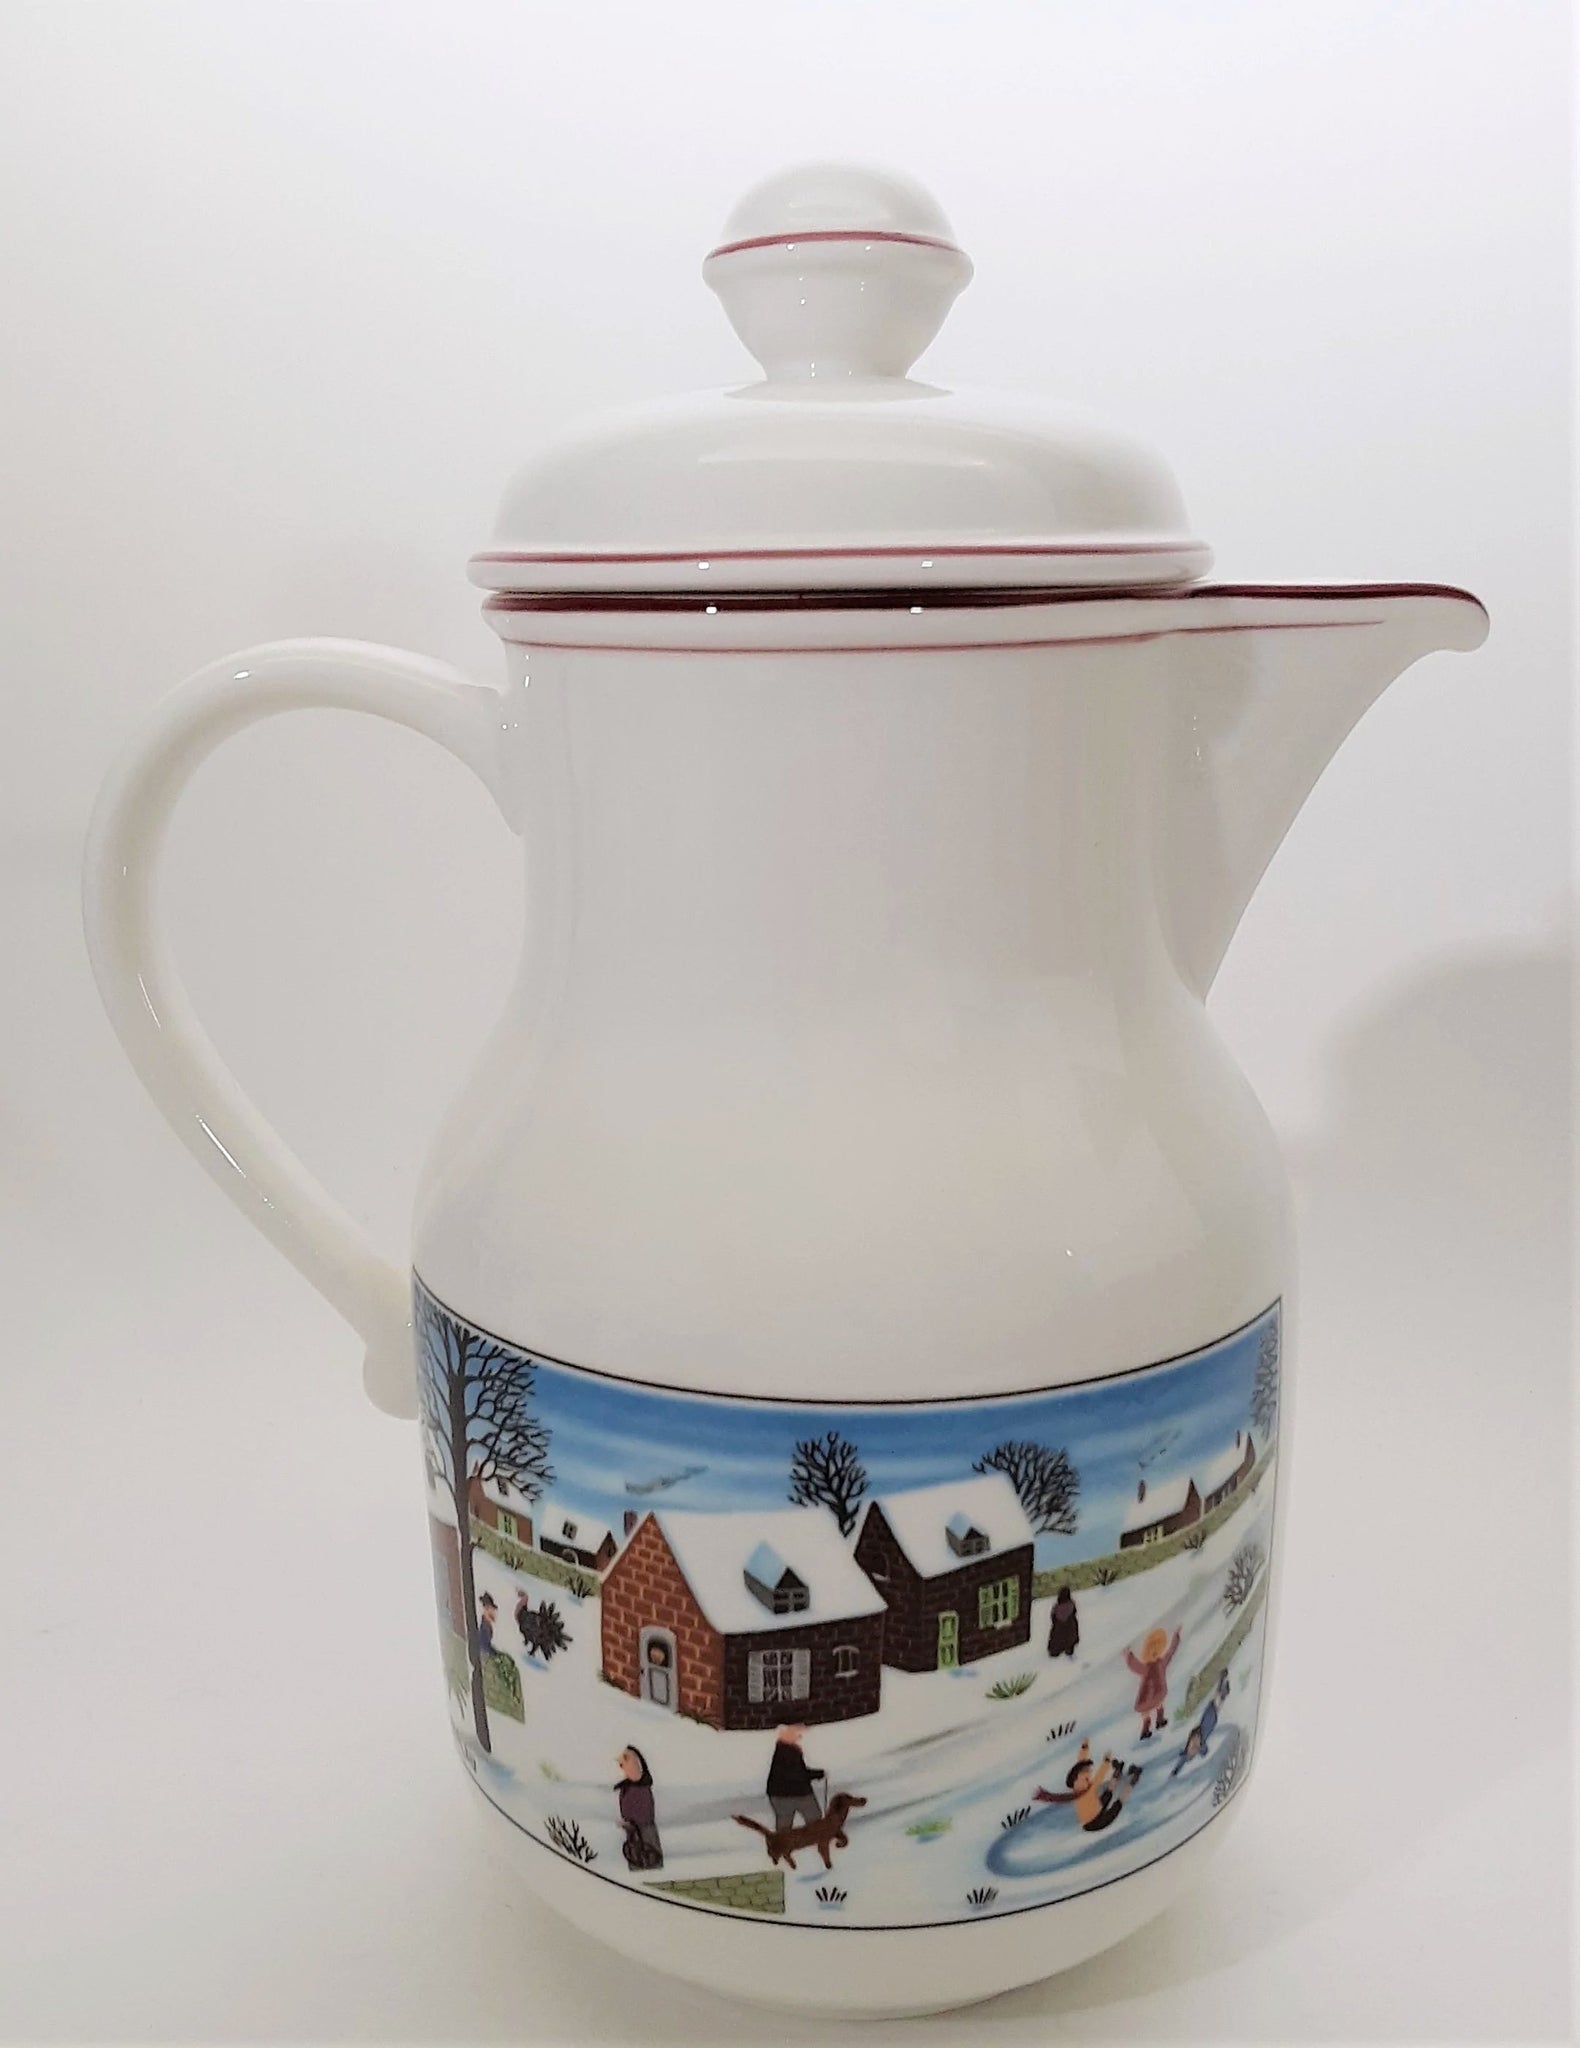 Christmas presents from Villeroy & Boch